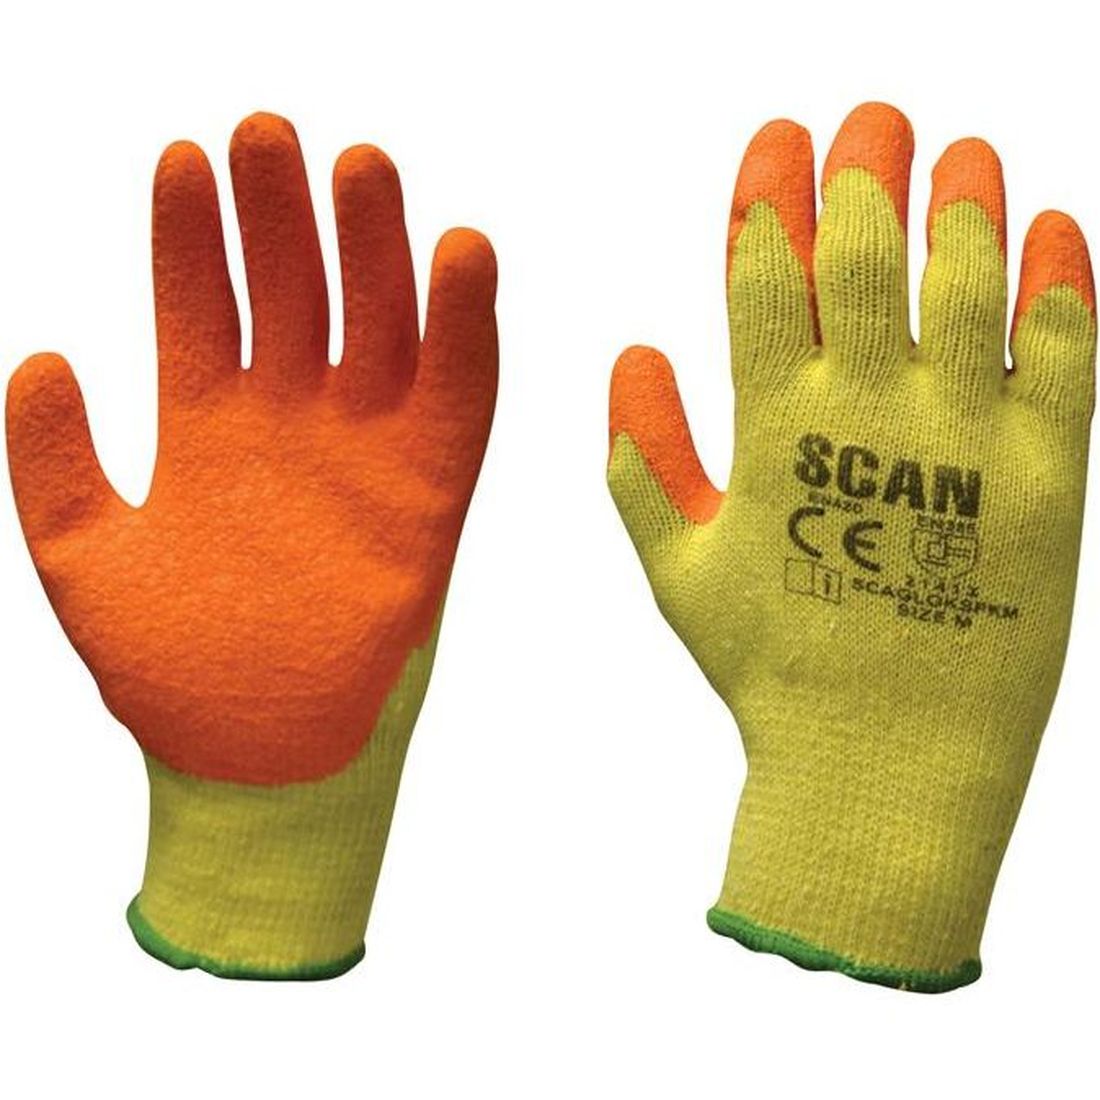 Scan Knitshell Latex Palm Gloves - L (Size 9)                                        